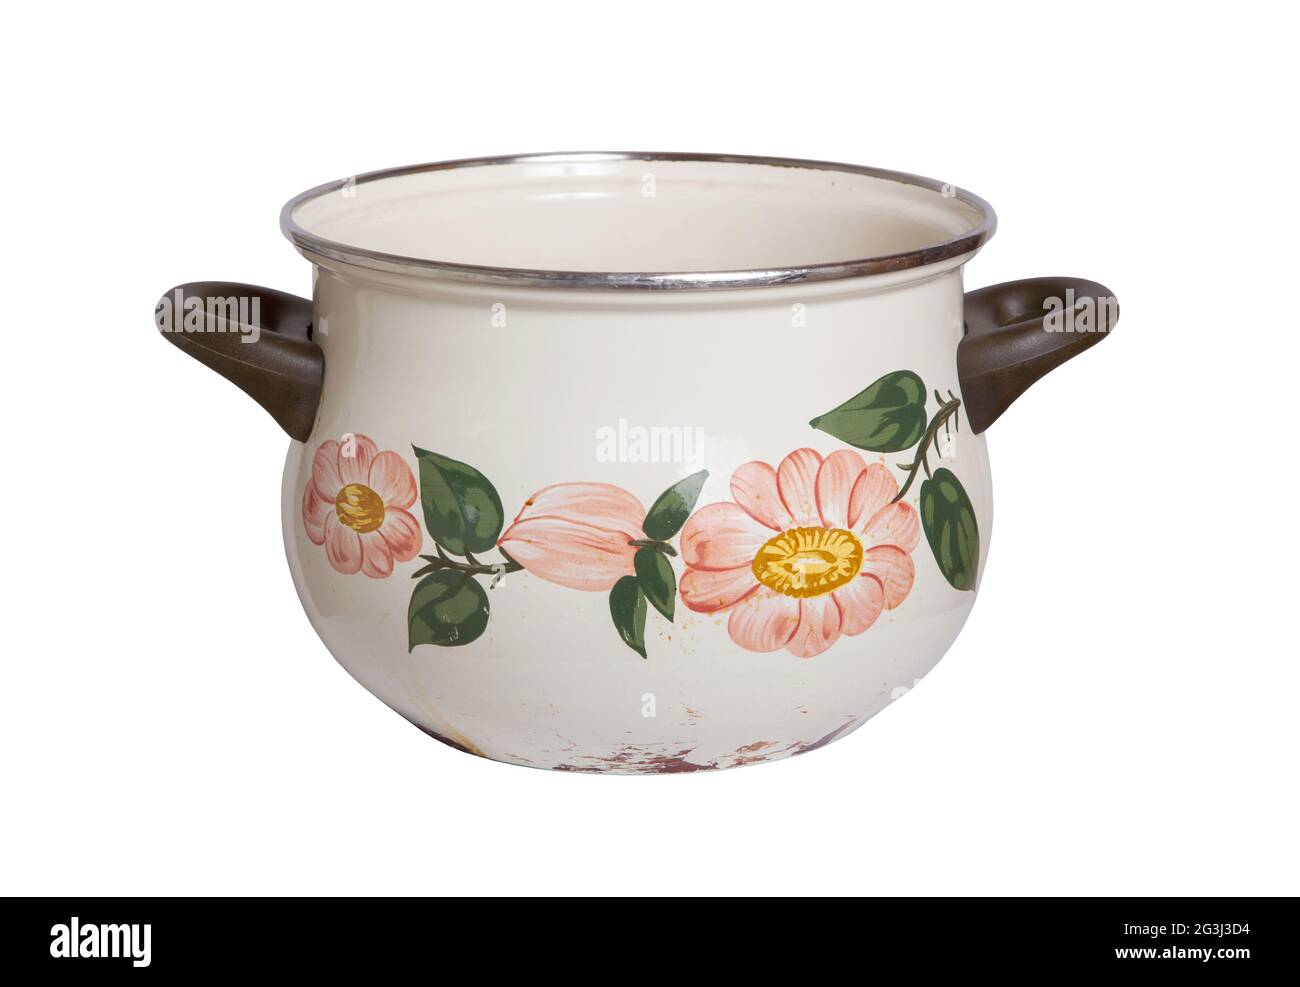 Old cooking pot isolated Stock Photo